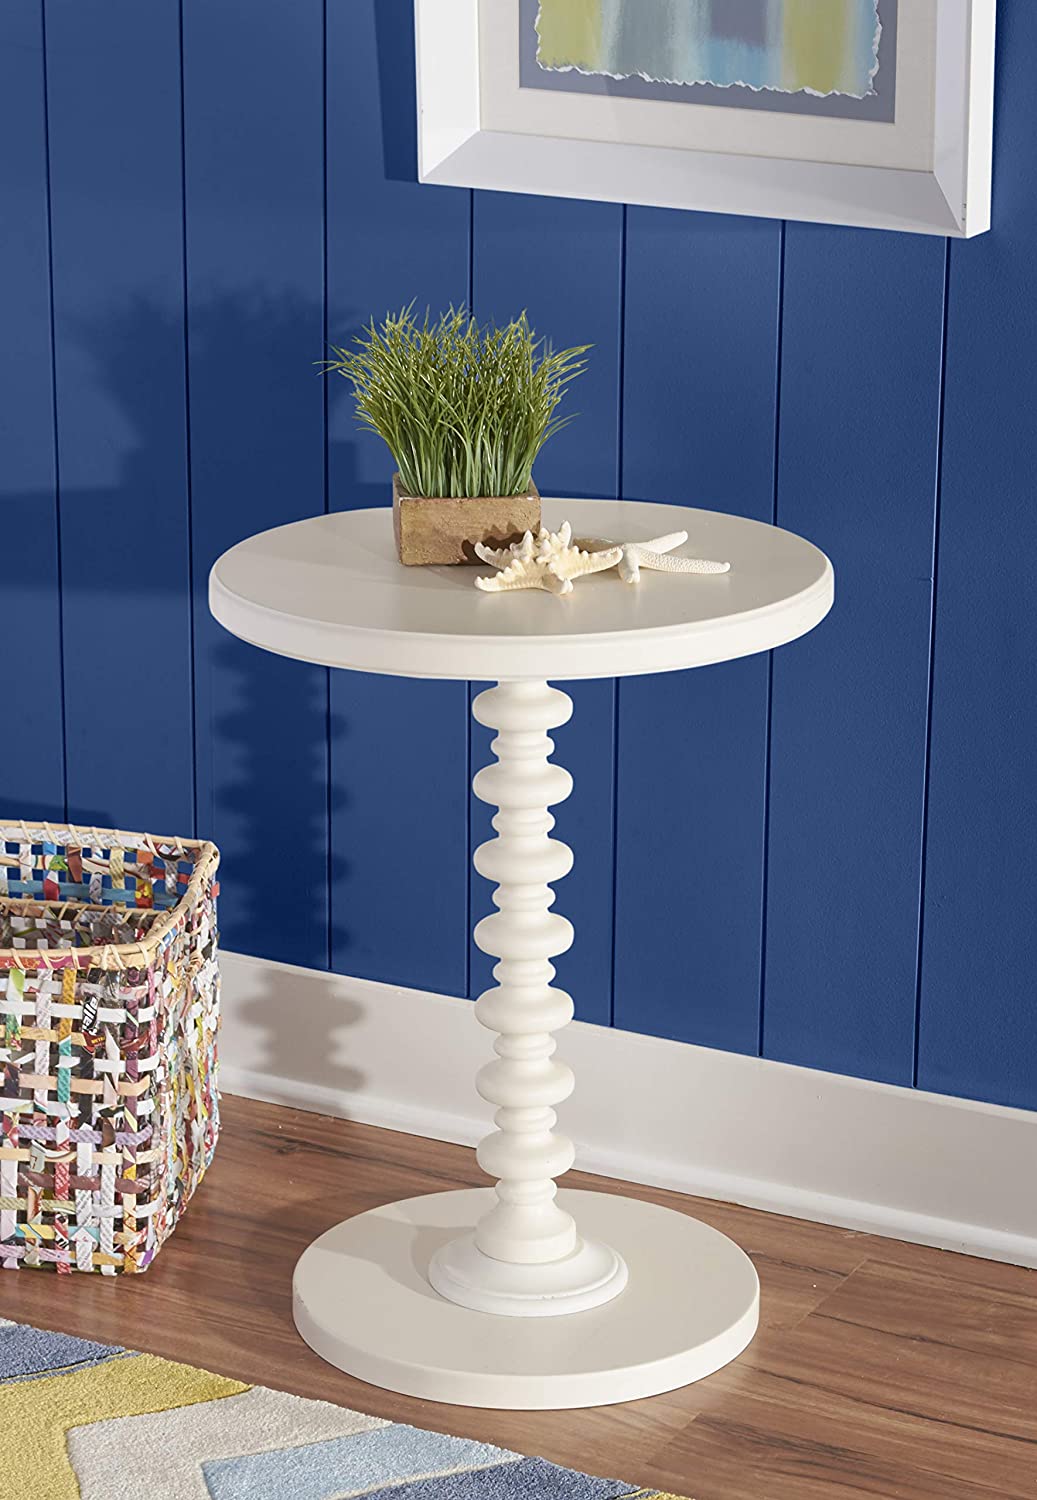 Powell Furniture Powell Round Spindle, White Table